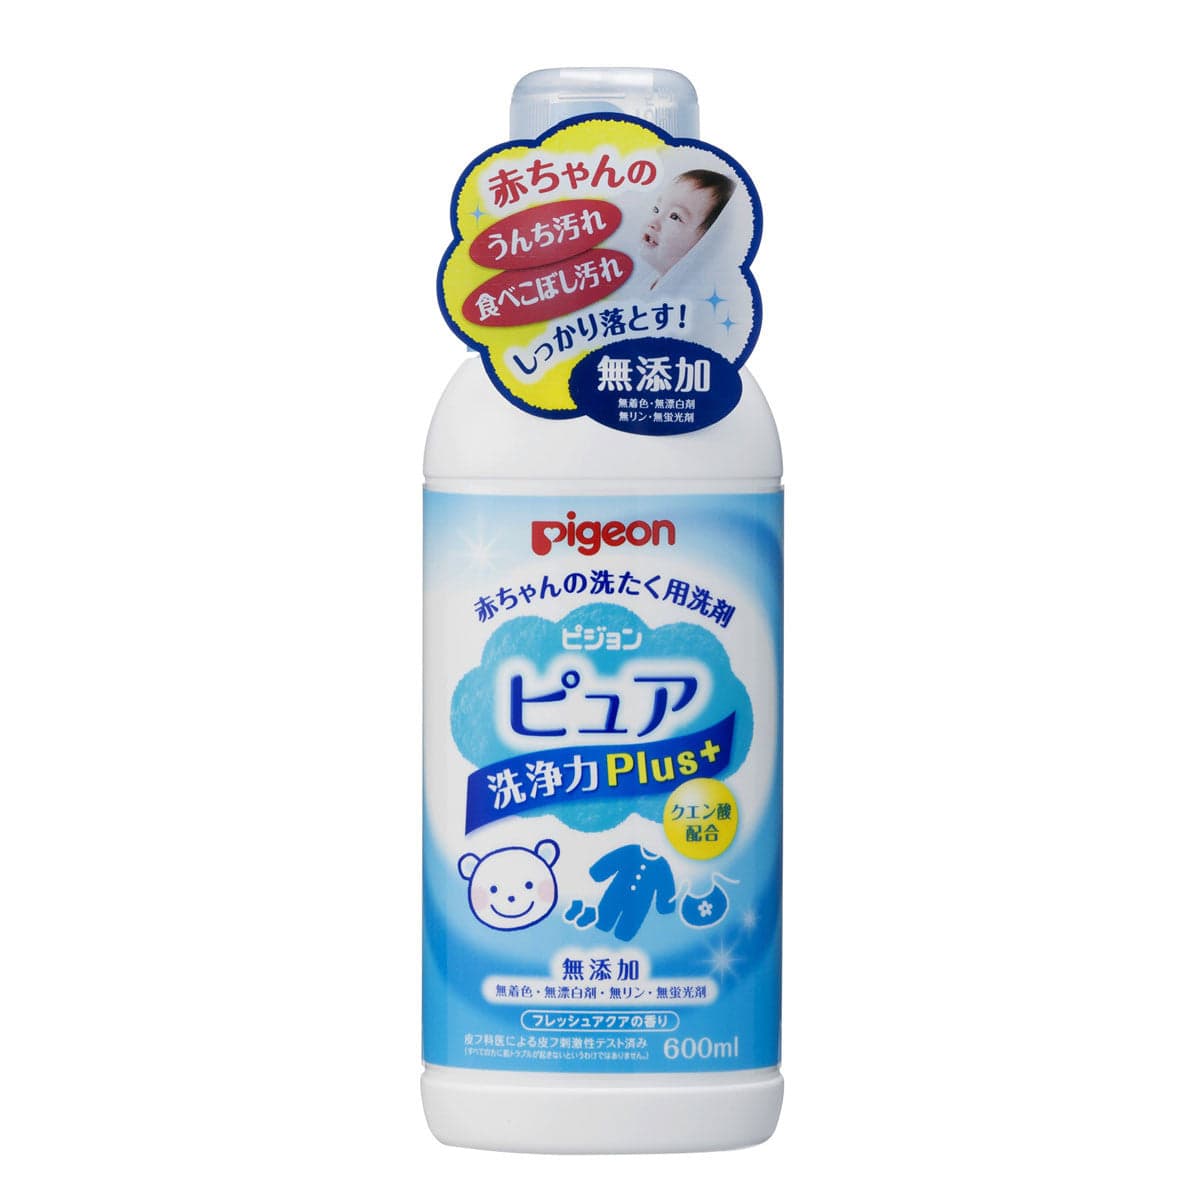 Pigeon - Baby Laundry Detergent Pure Cleaning Power Plus - 600ml Baby Detergents 4902508121347 Durio.sg